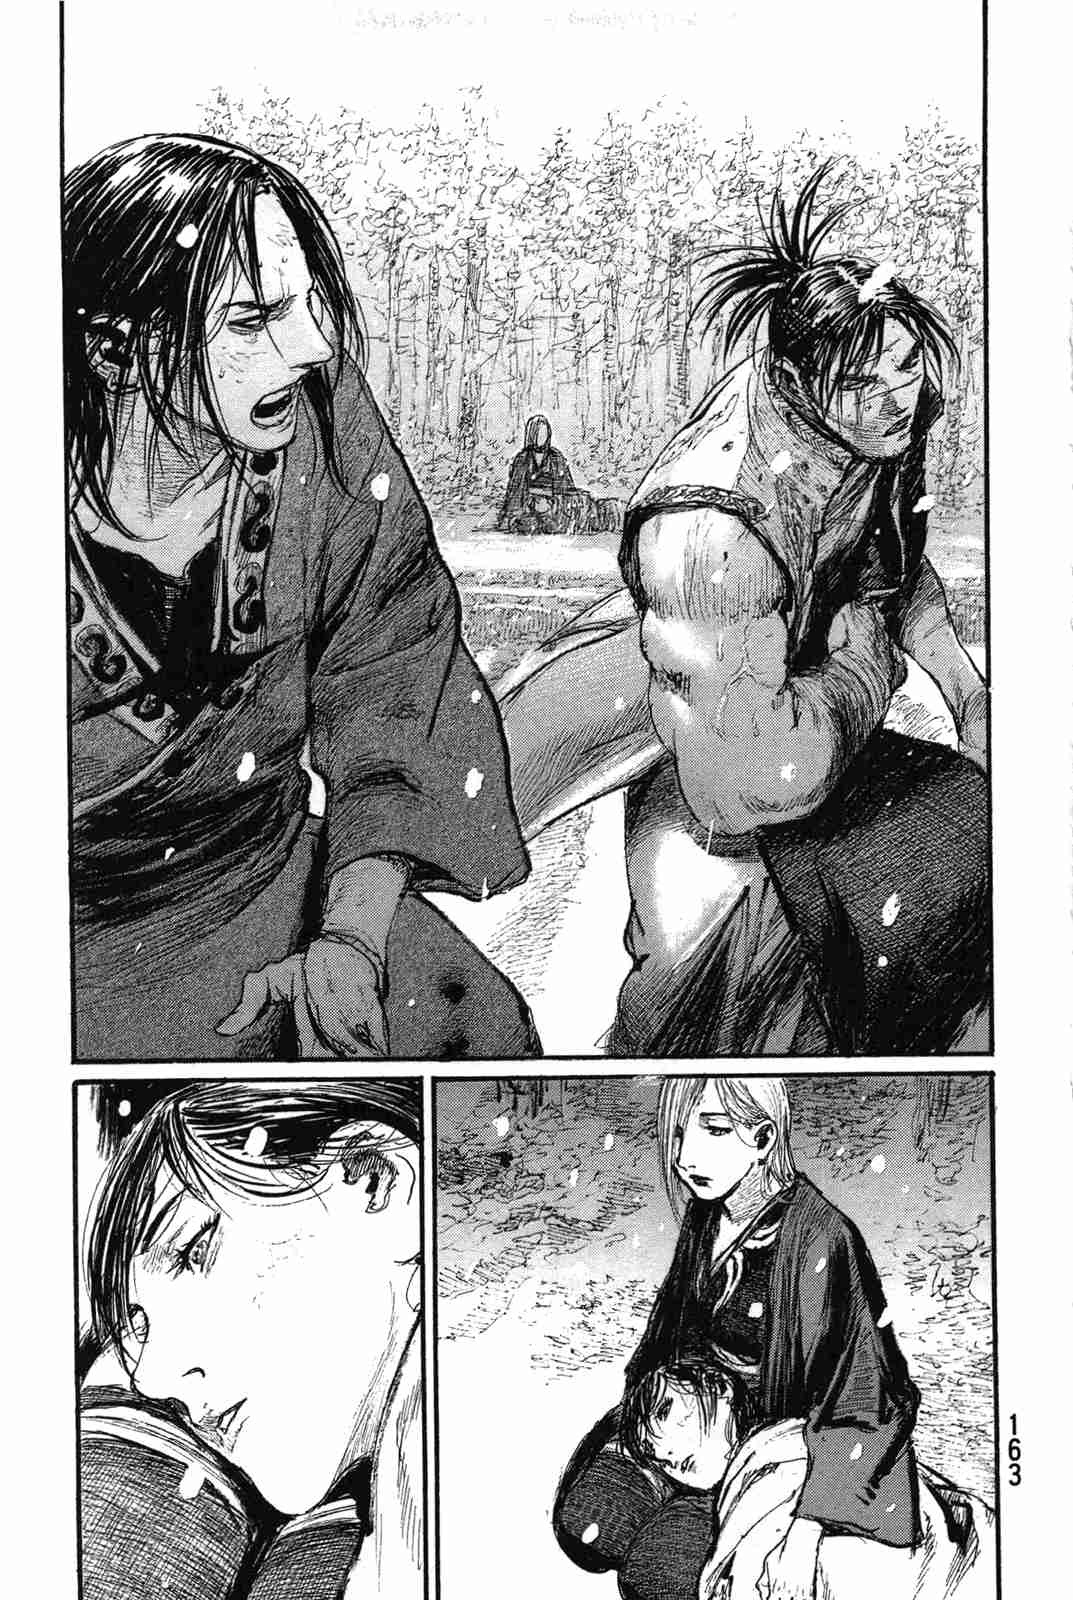 Blade of the Immortal Vol. 30 Ch. 203 Where Ferocious Winds Contest